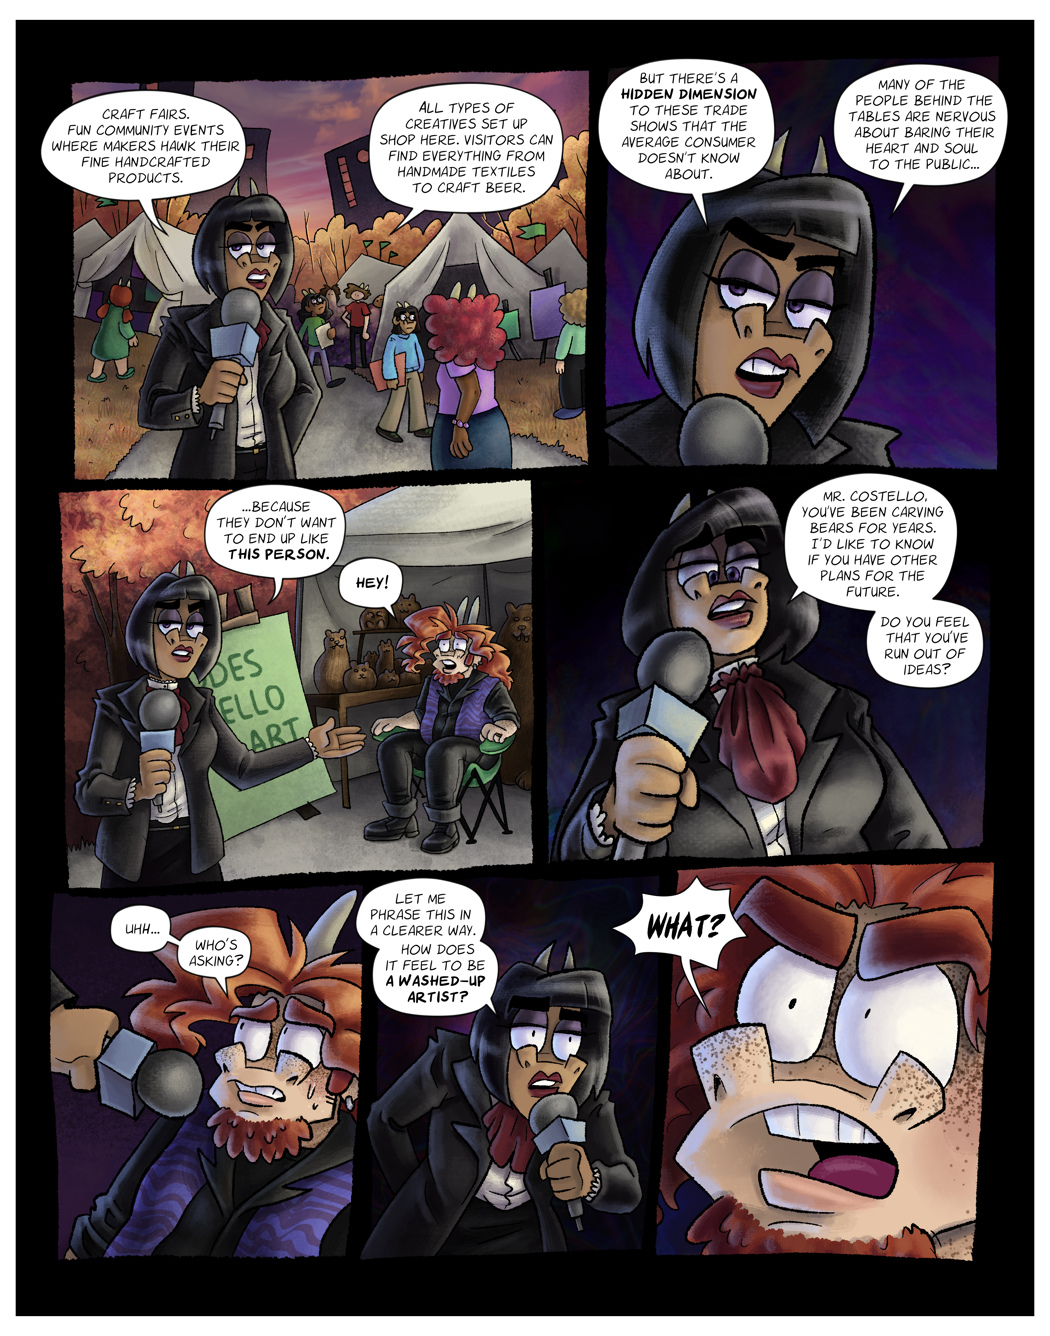 Chapter 3 page 13: TV Dreams